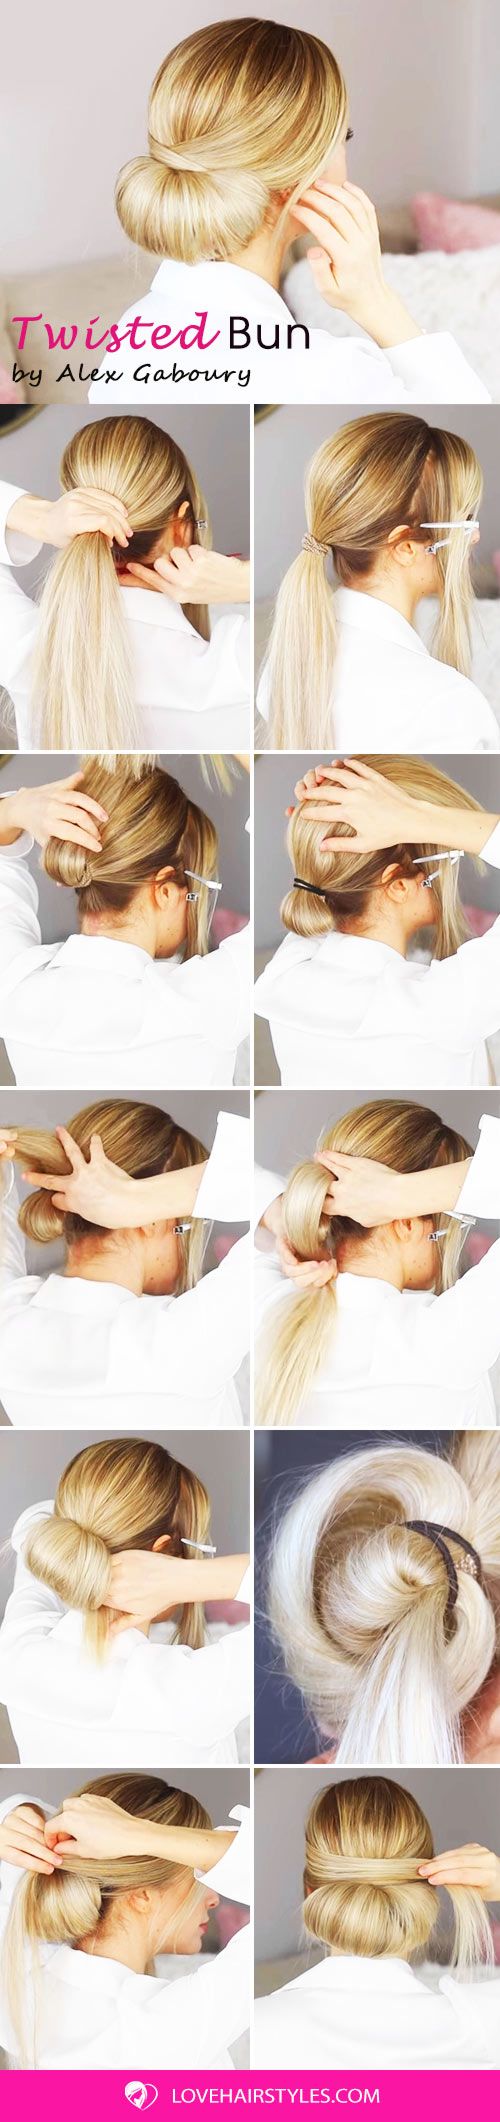 How To: Easy And Elegant Twisted Bun Hairstyle #updo #bun #hairtutorial